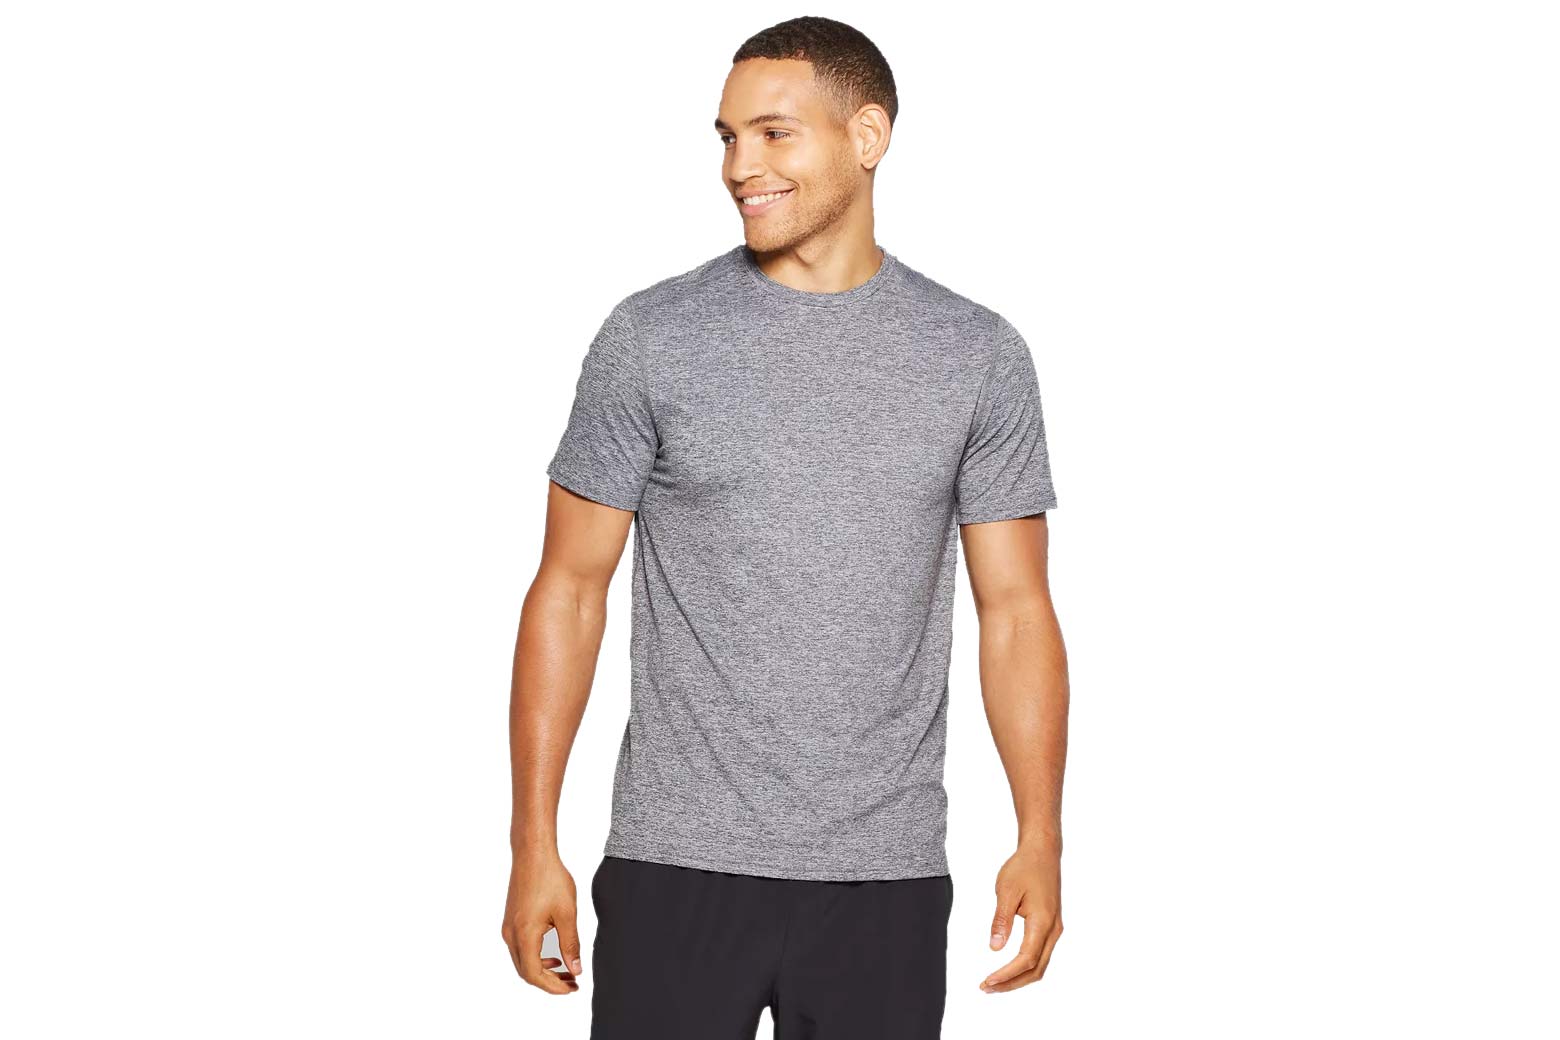 A model in a gray T-shirt.